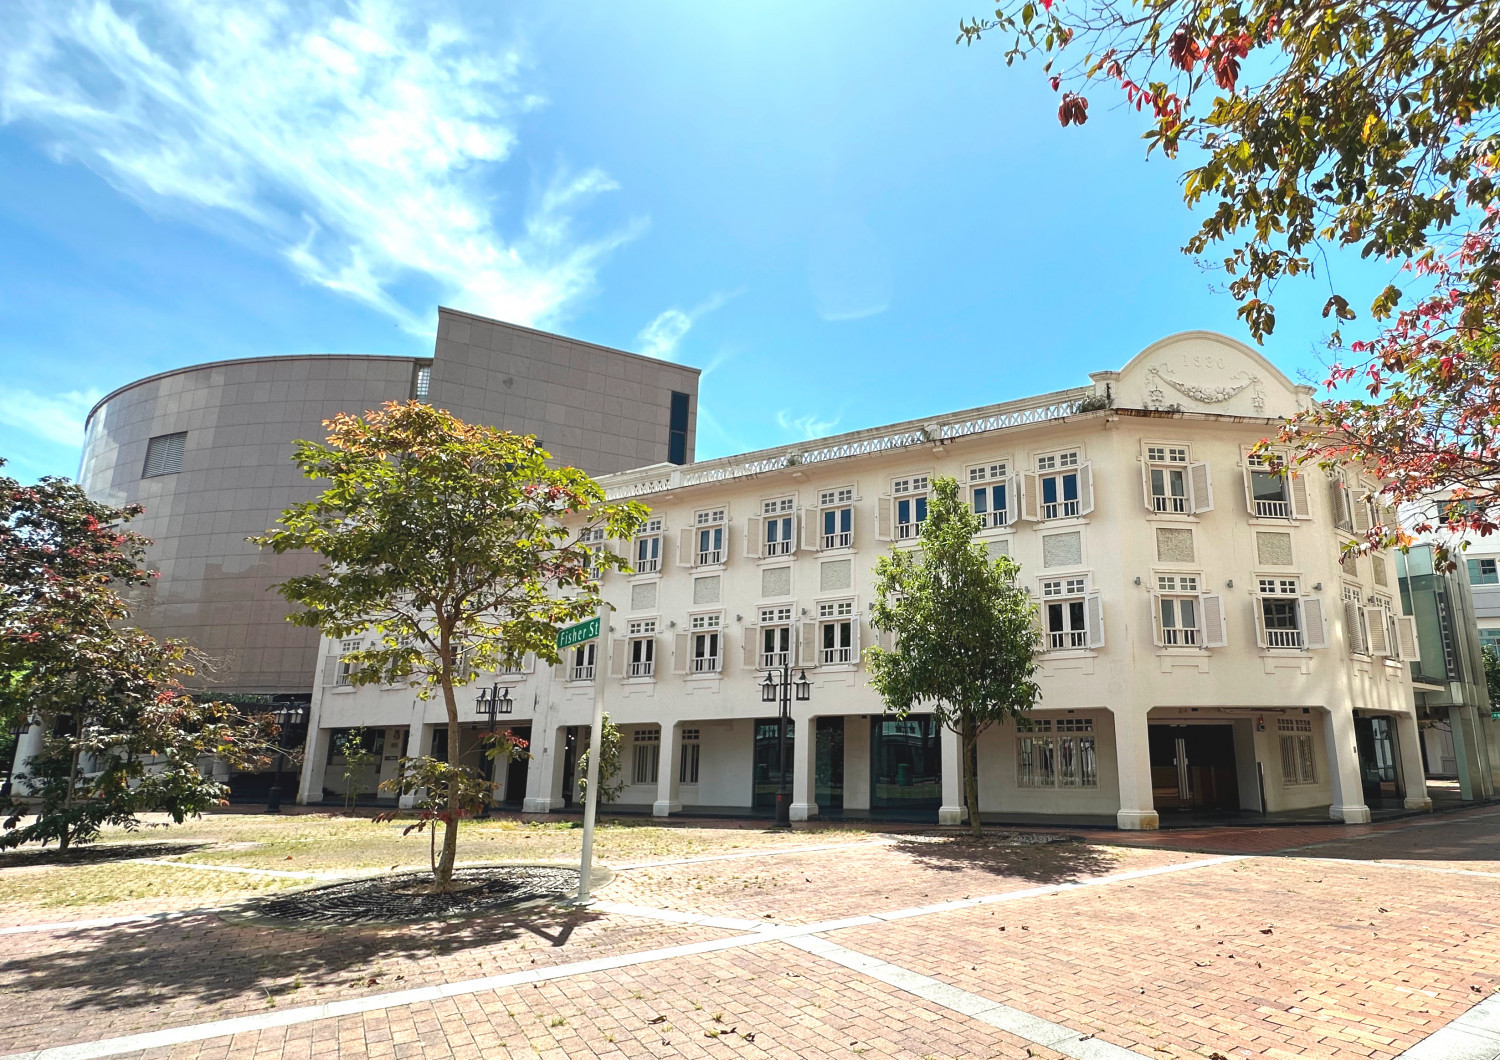 Raffles Education Square building on sale of $200 mil - Property News